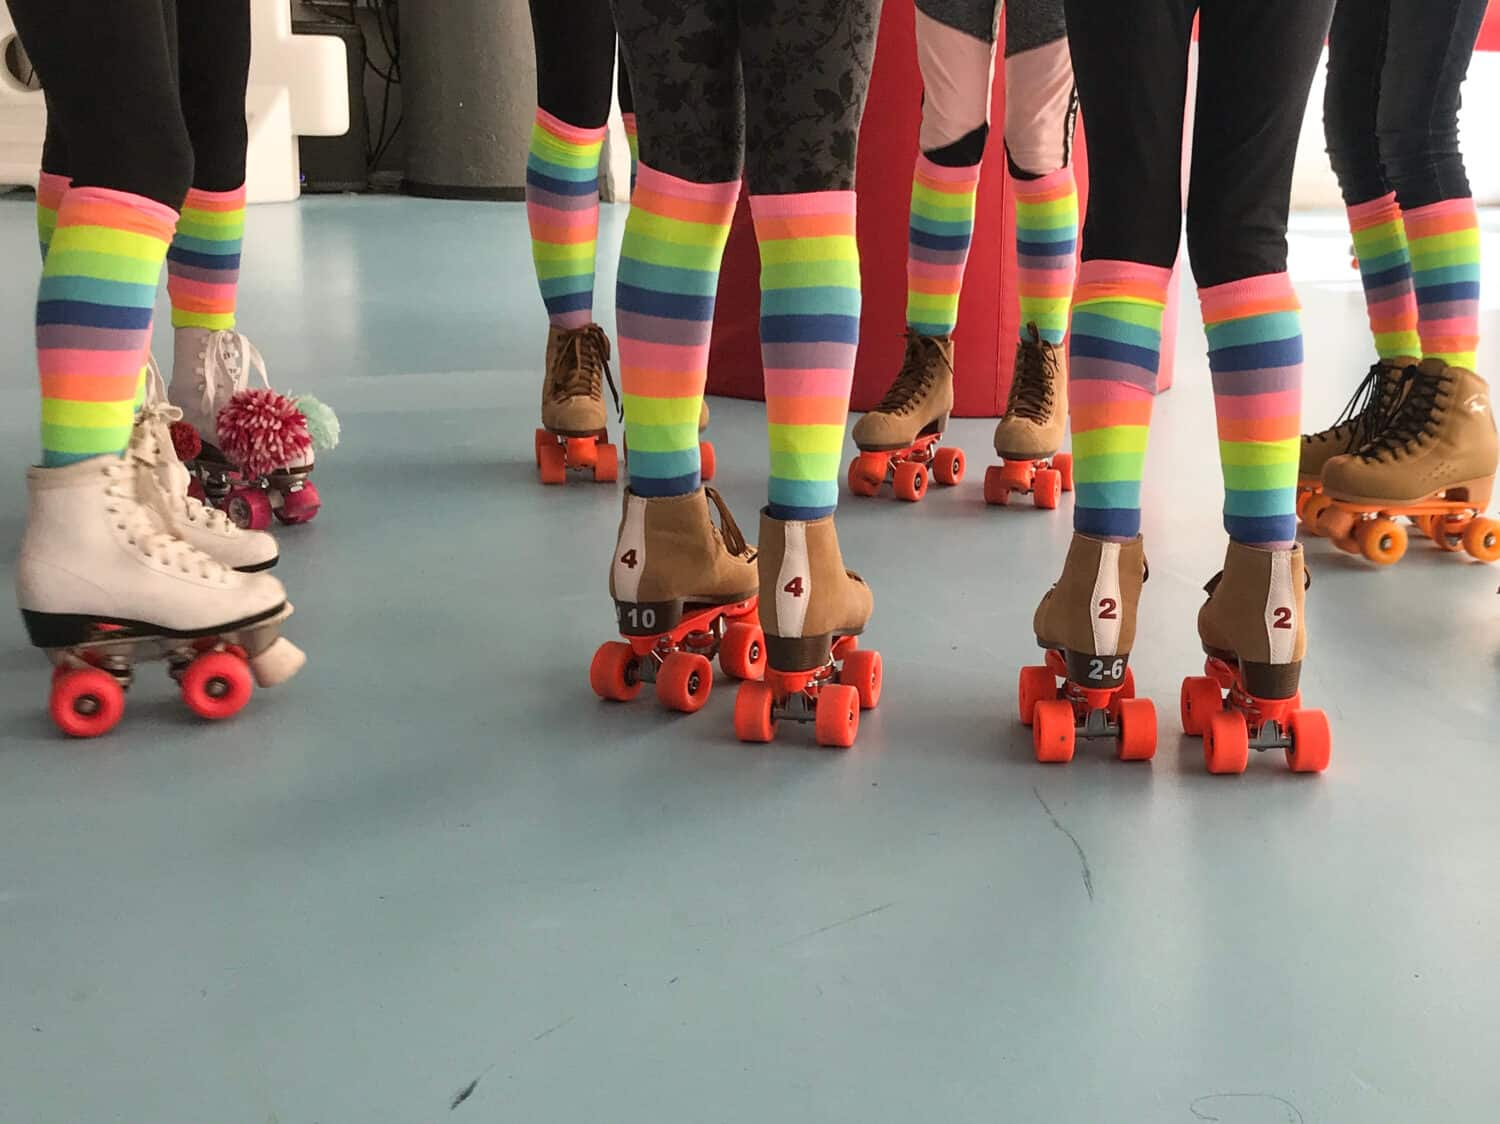 Girls roller skate party with colorful socks